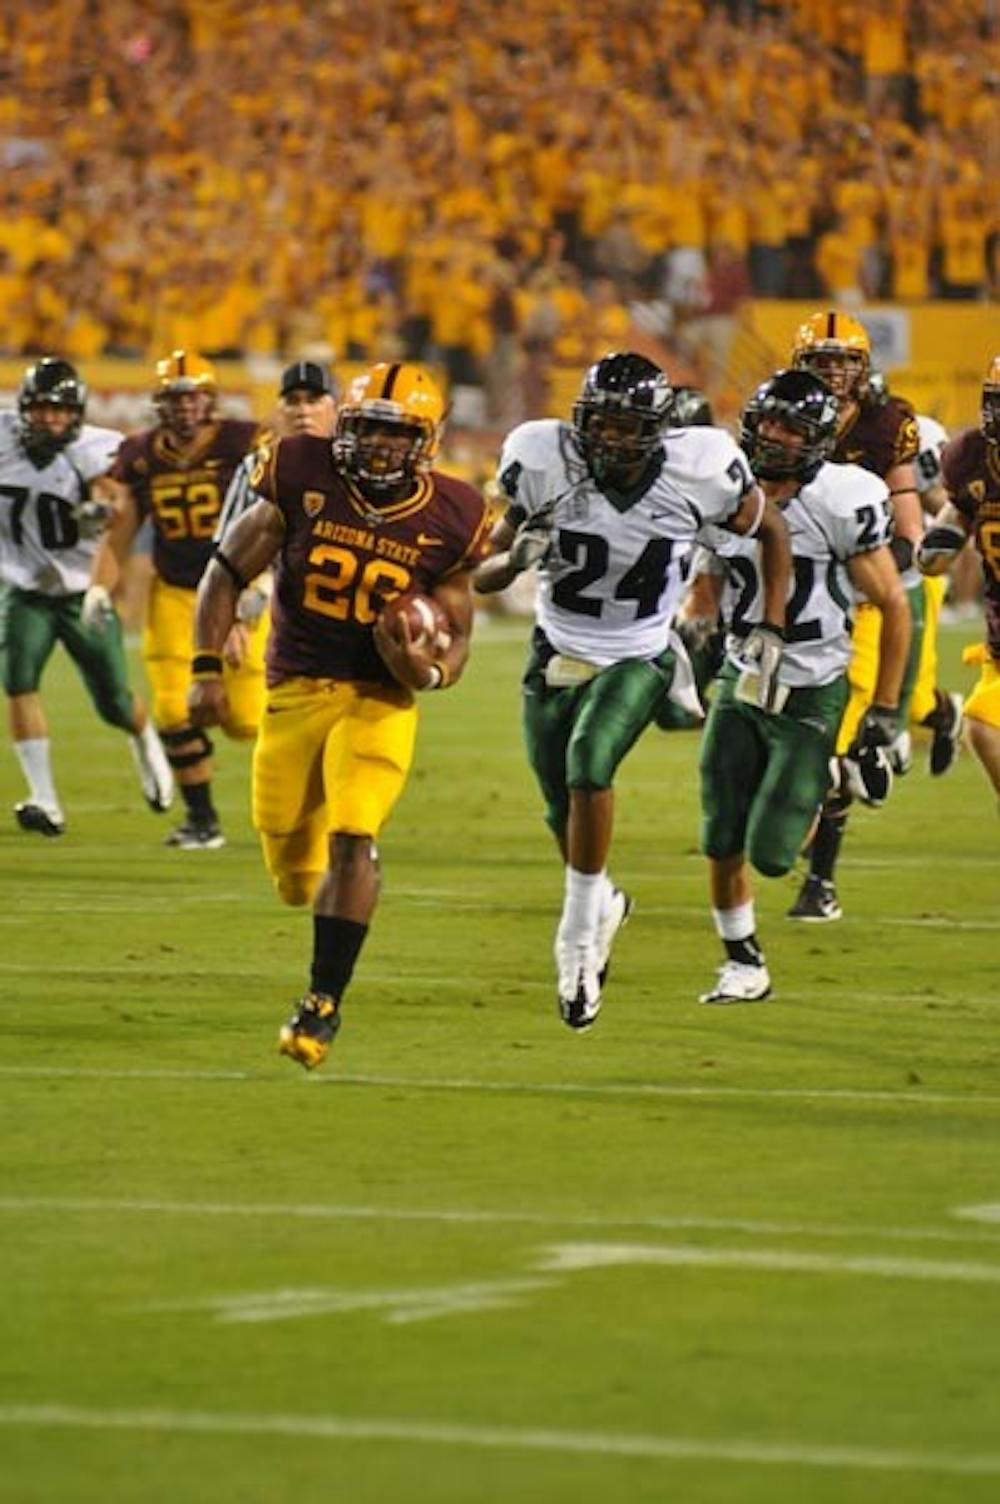 ON THE RUN: ASU sophomore running back Cameron Marshall races toward the end zone against Portland state last Saturday. Marshall scored three times on the ground in the Sun Devils 54-9 win. (Photo by Aaron Lavinsky)